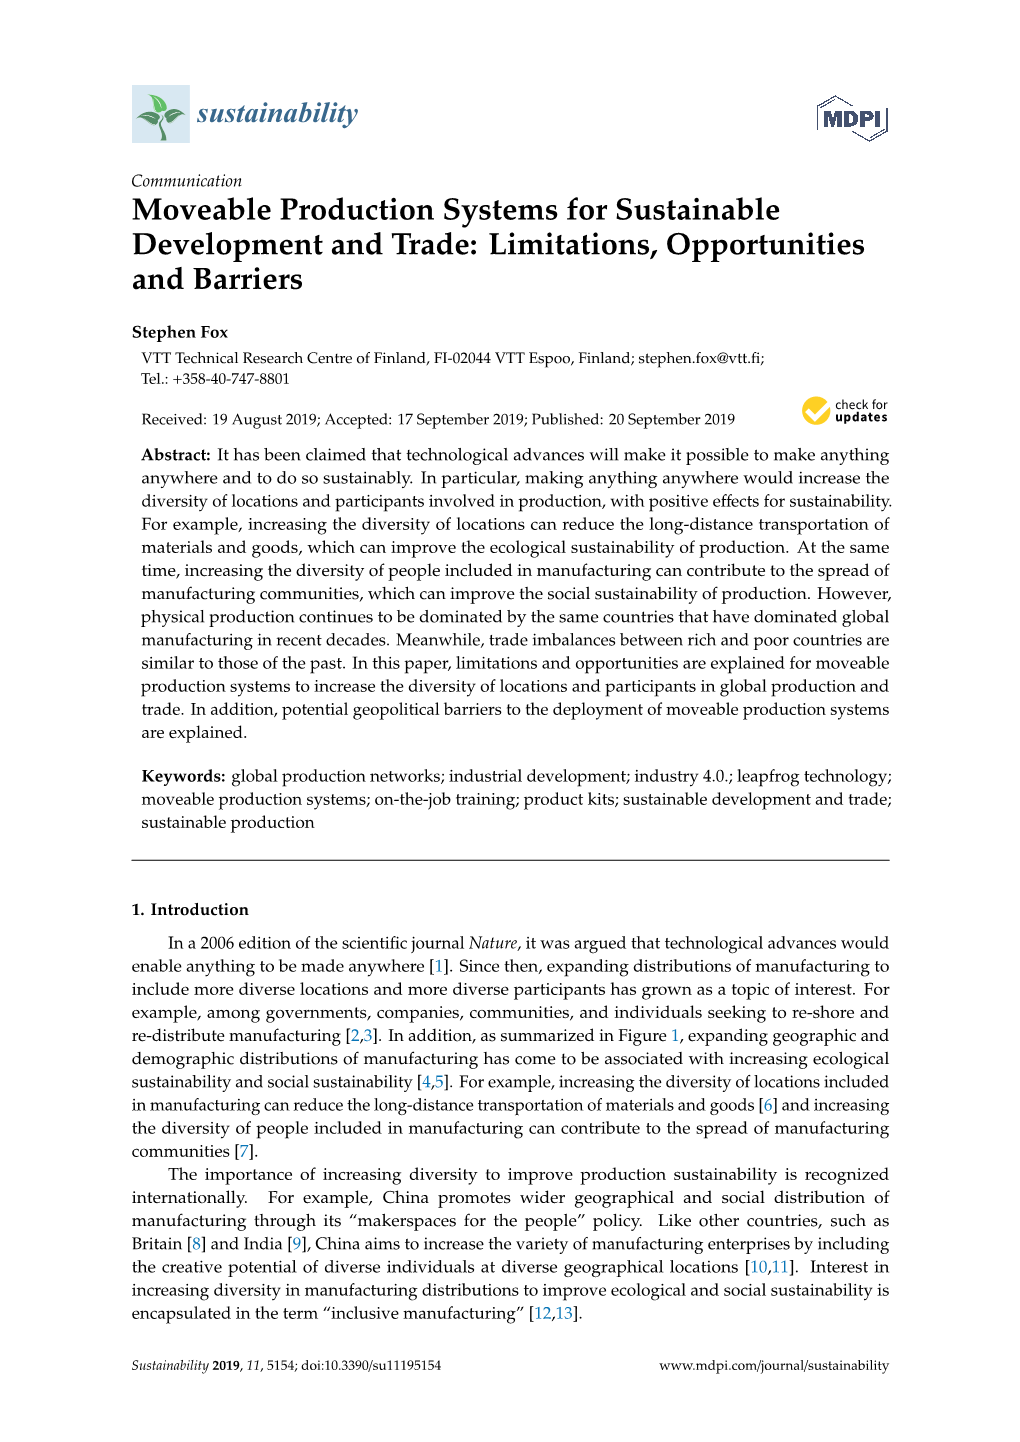 Moveable Production Systems for Sustainable Development and Trade: Limitations, Opportunities and Barriers